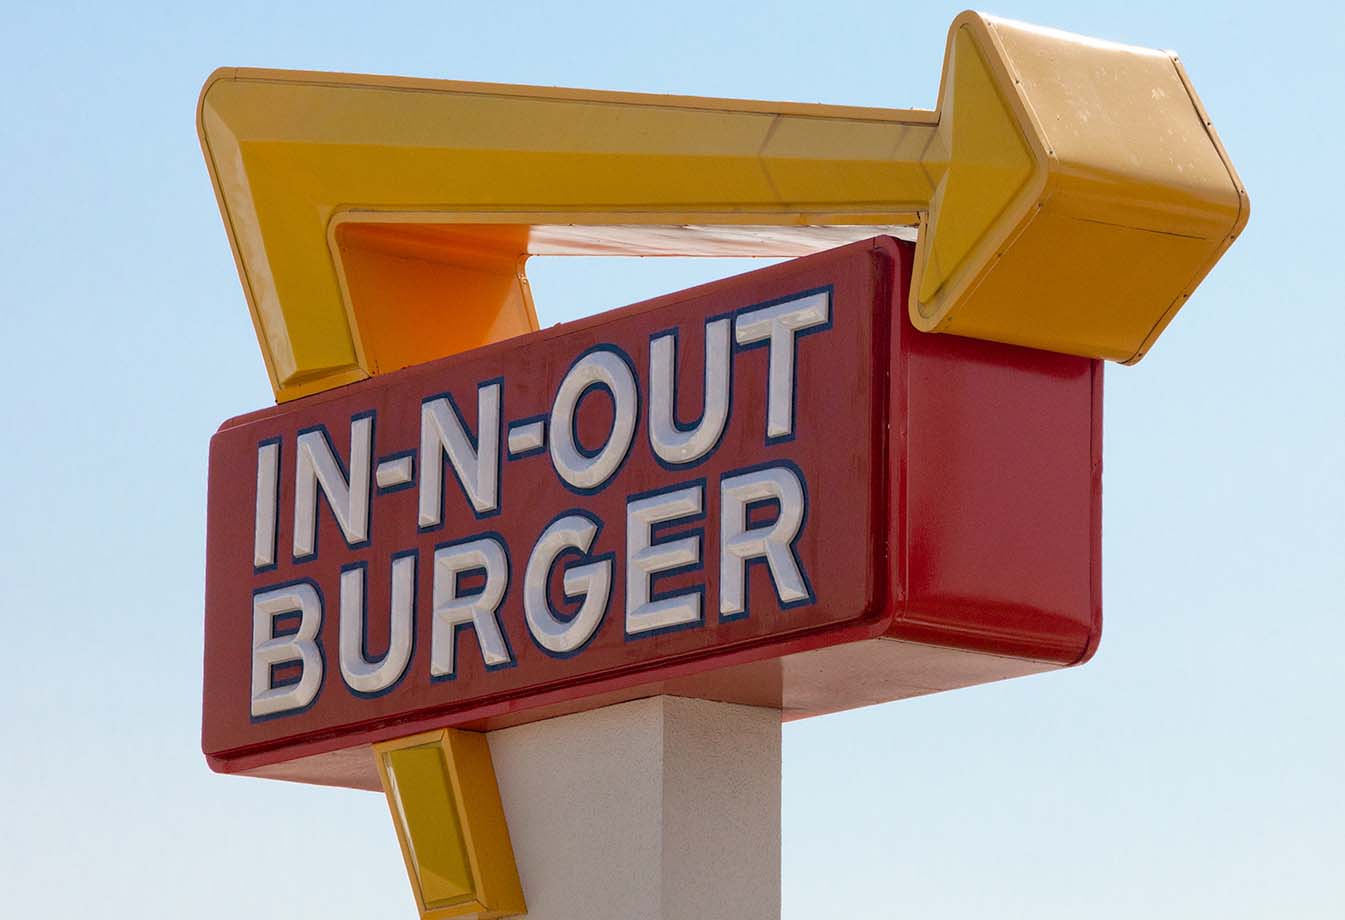 In-N-Out Burger sign in Los Angeles (Image: Wikimedia)